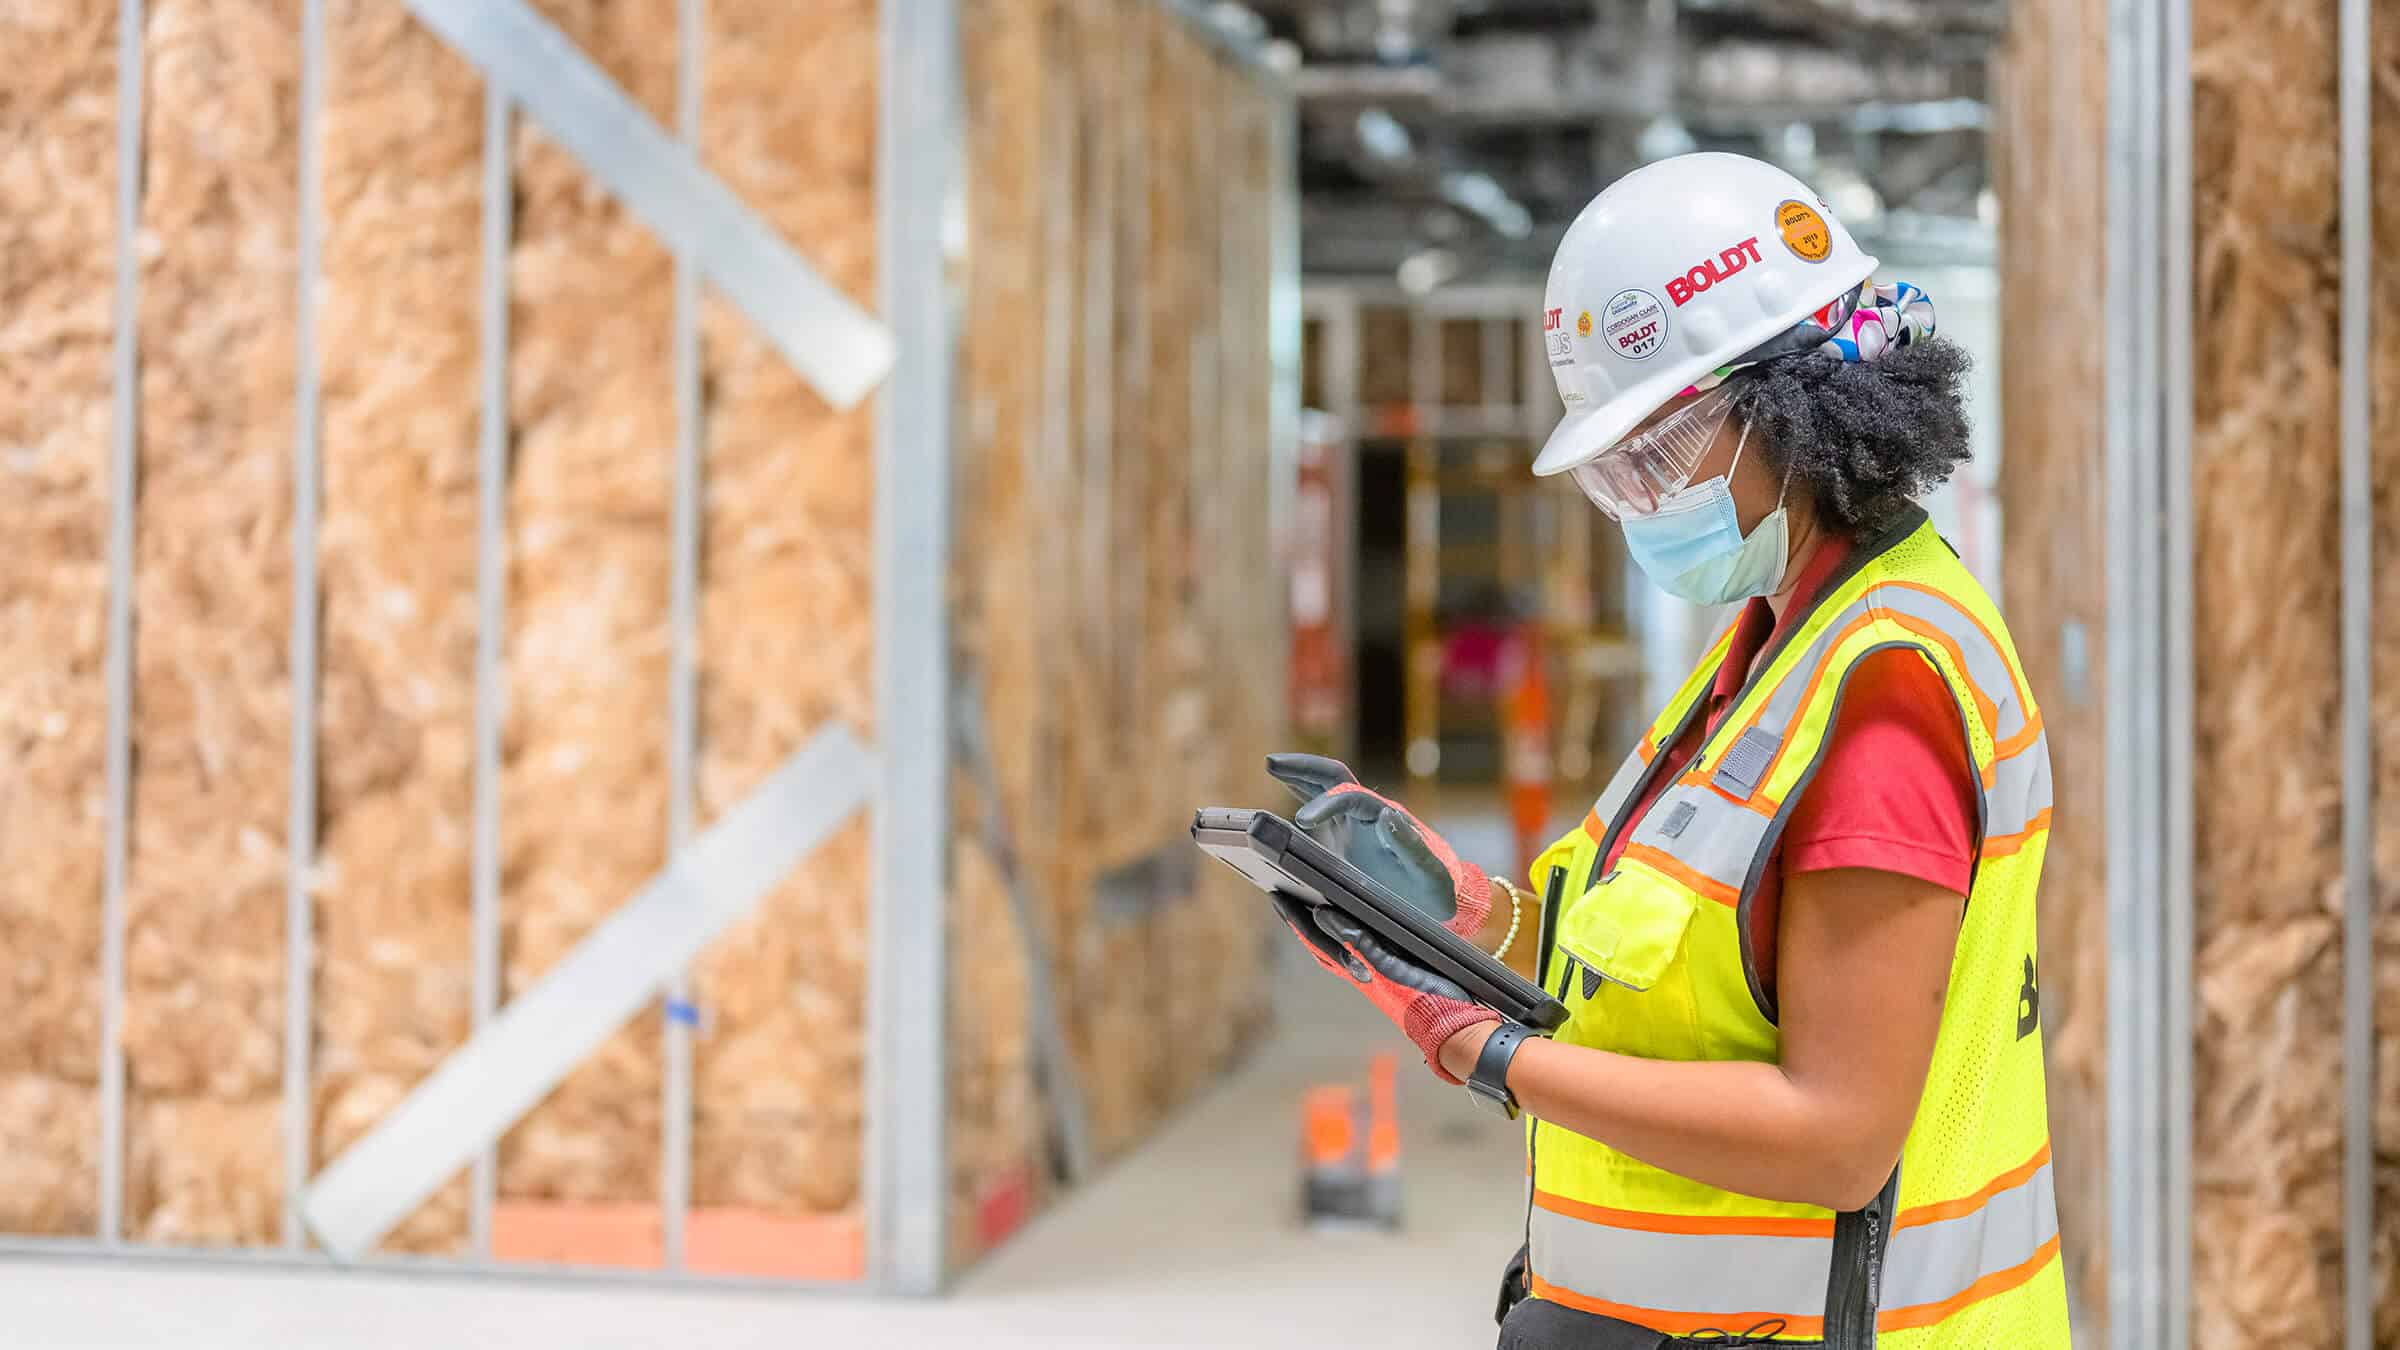 Construction worker stands among modular units while reading on a tablet